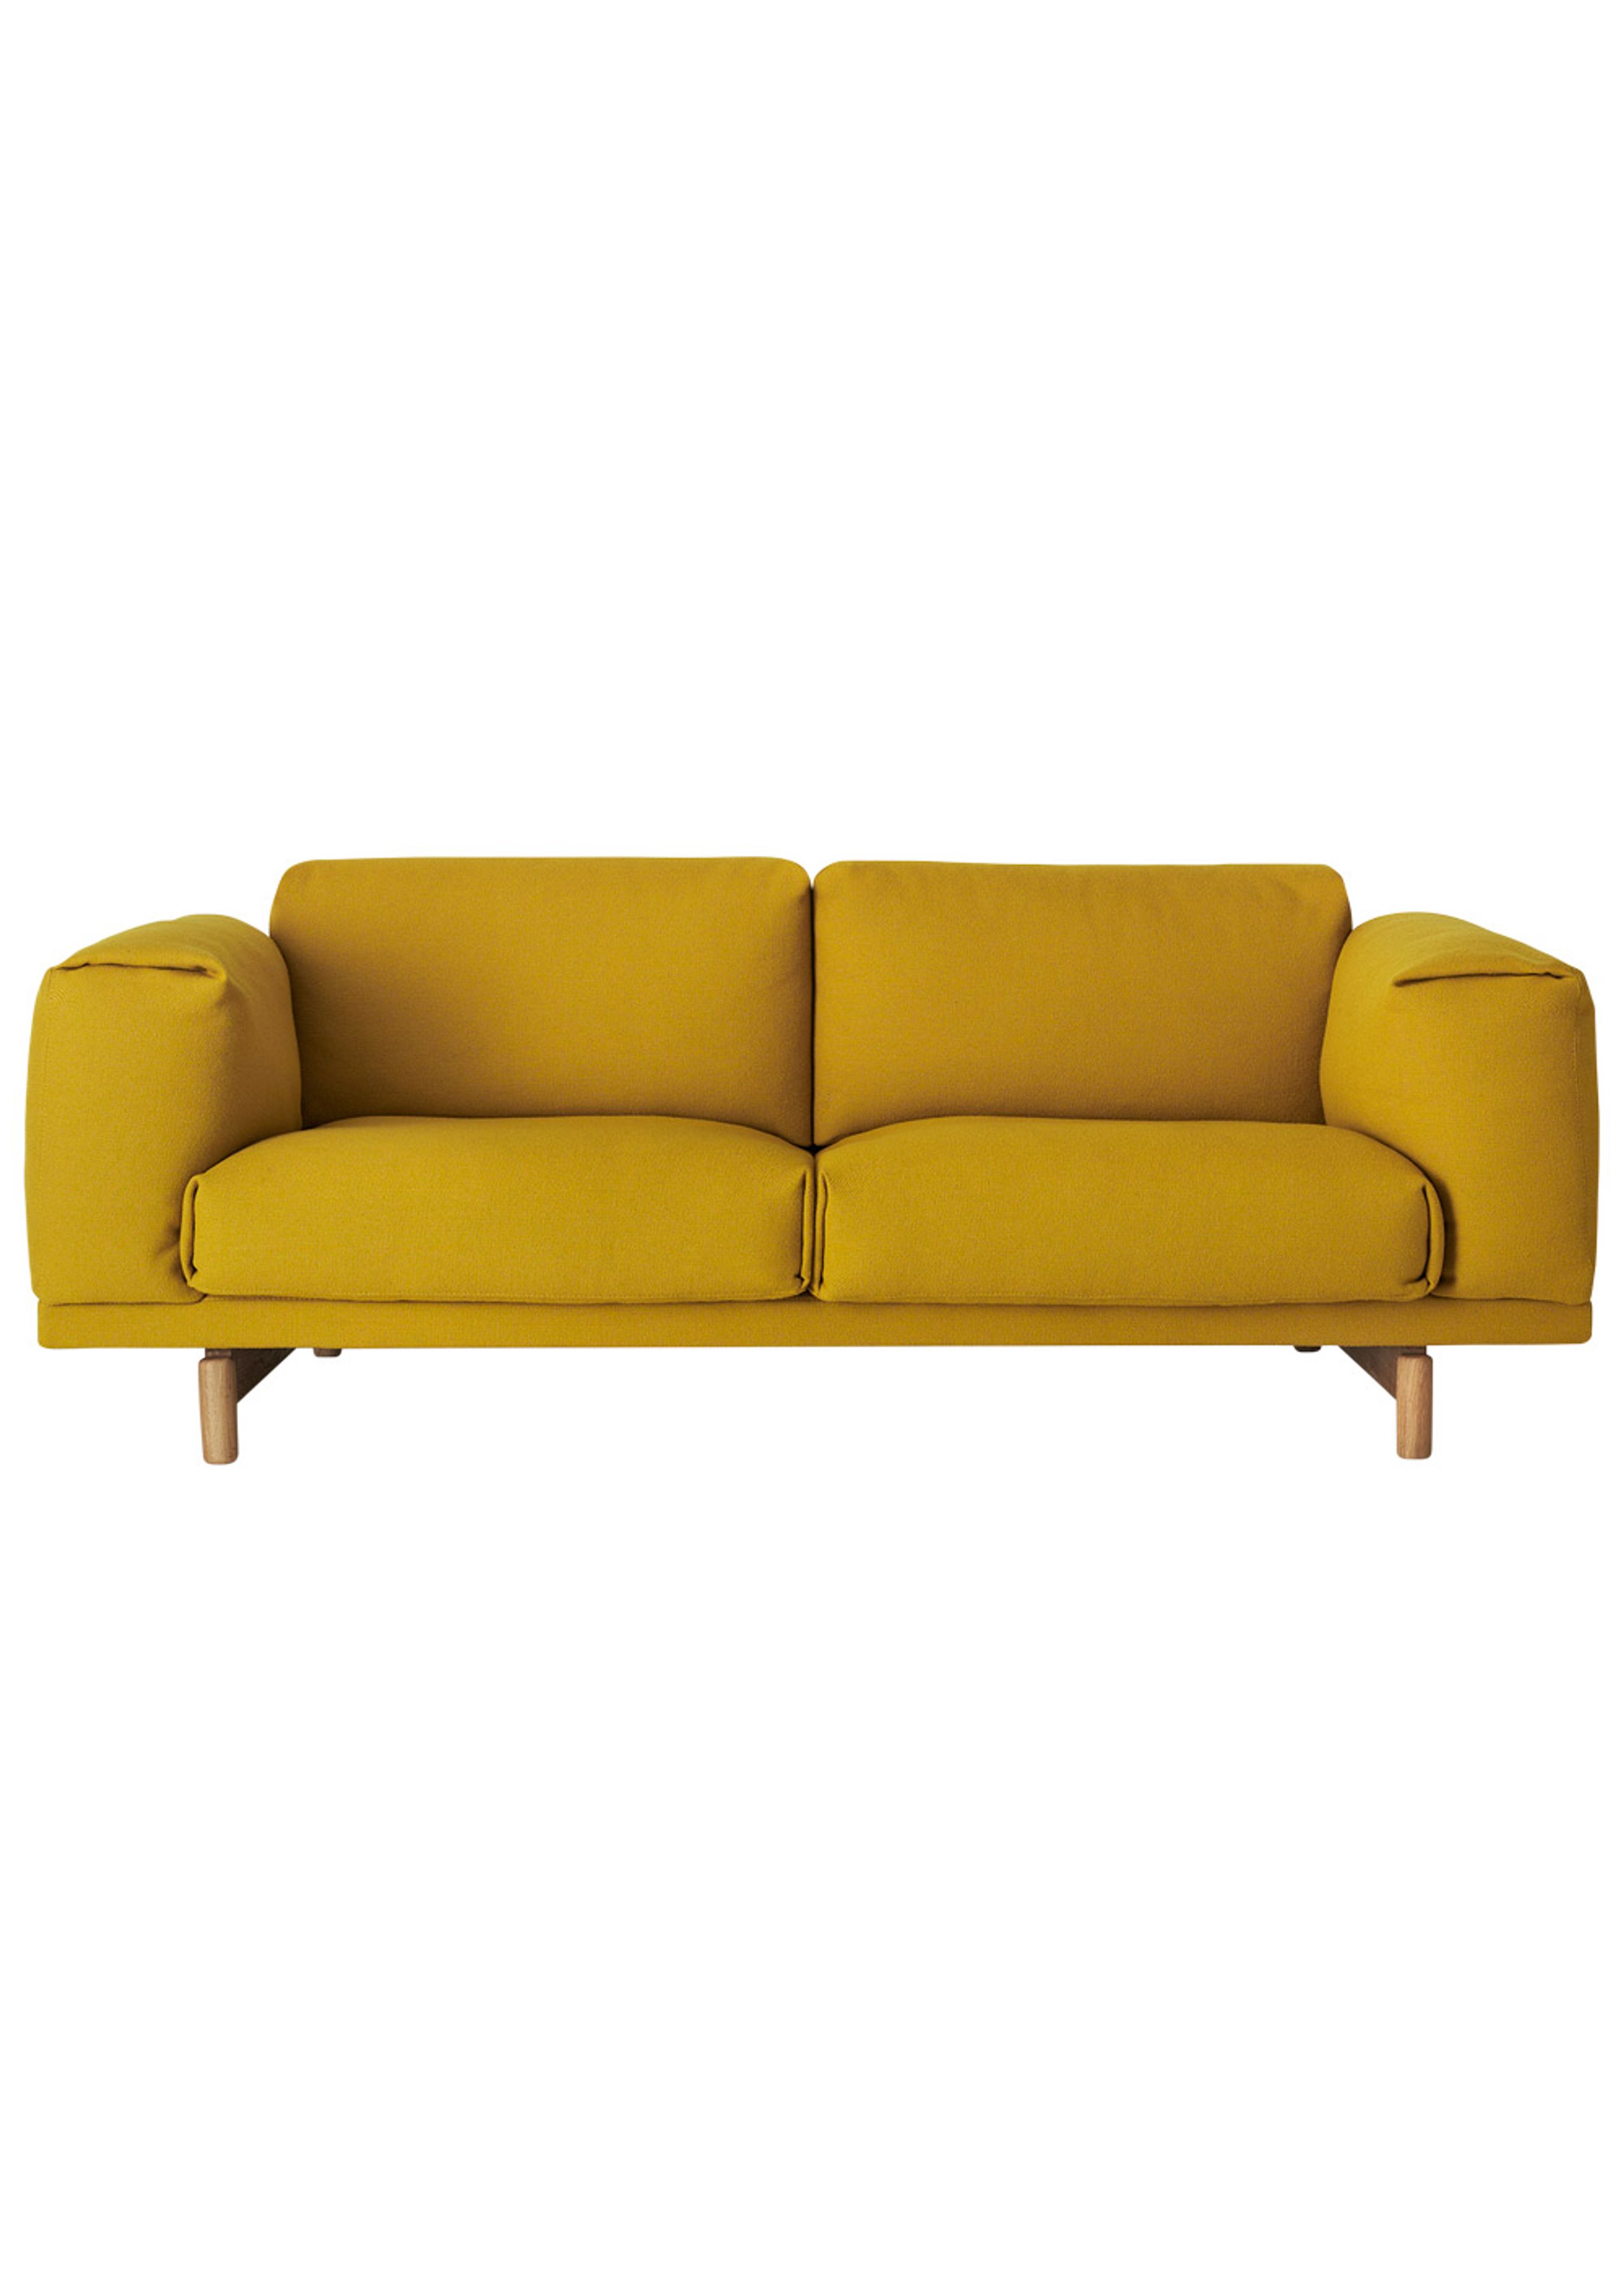  Rest  Sofa  2 Seater Couch Muuto 